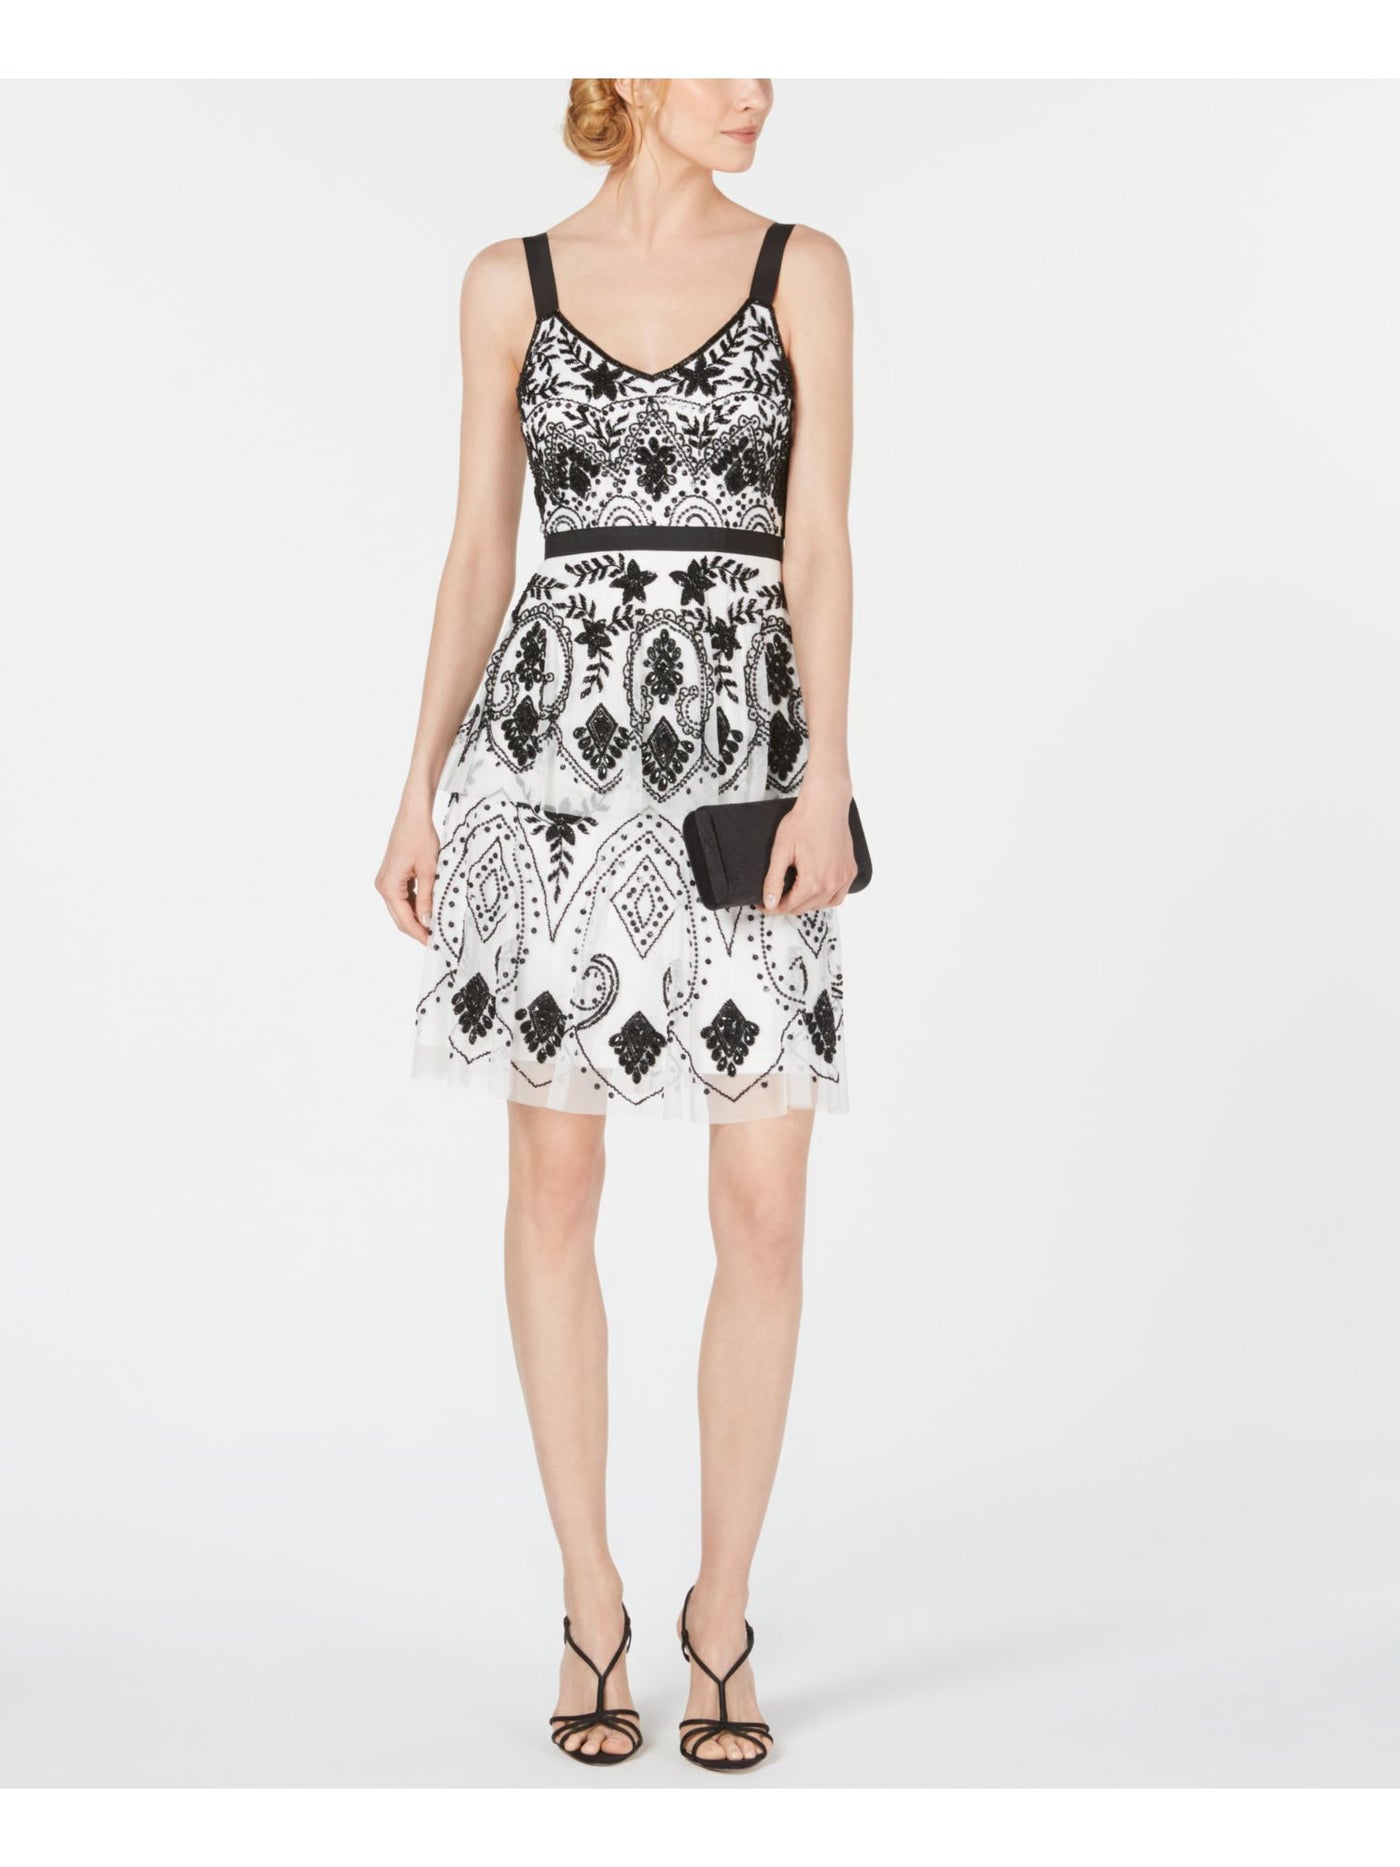 ADRIANNA PAPELL Womens White Beaded Sleeveless Scoop Neck Above The Knee Cocktail A-Line Dress 6